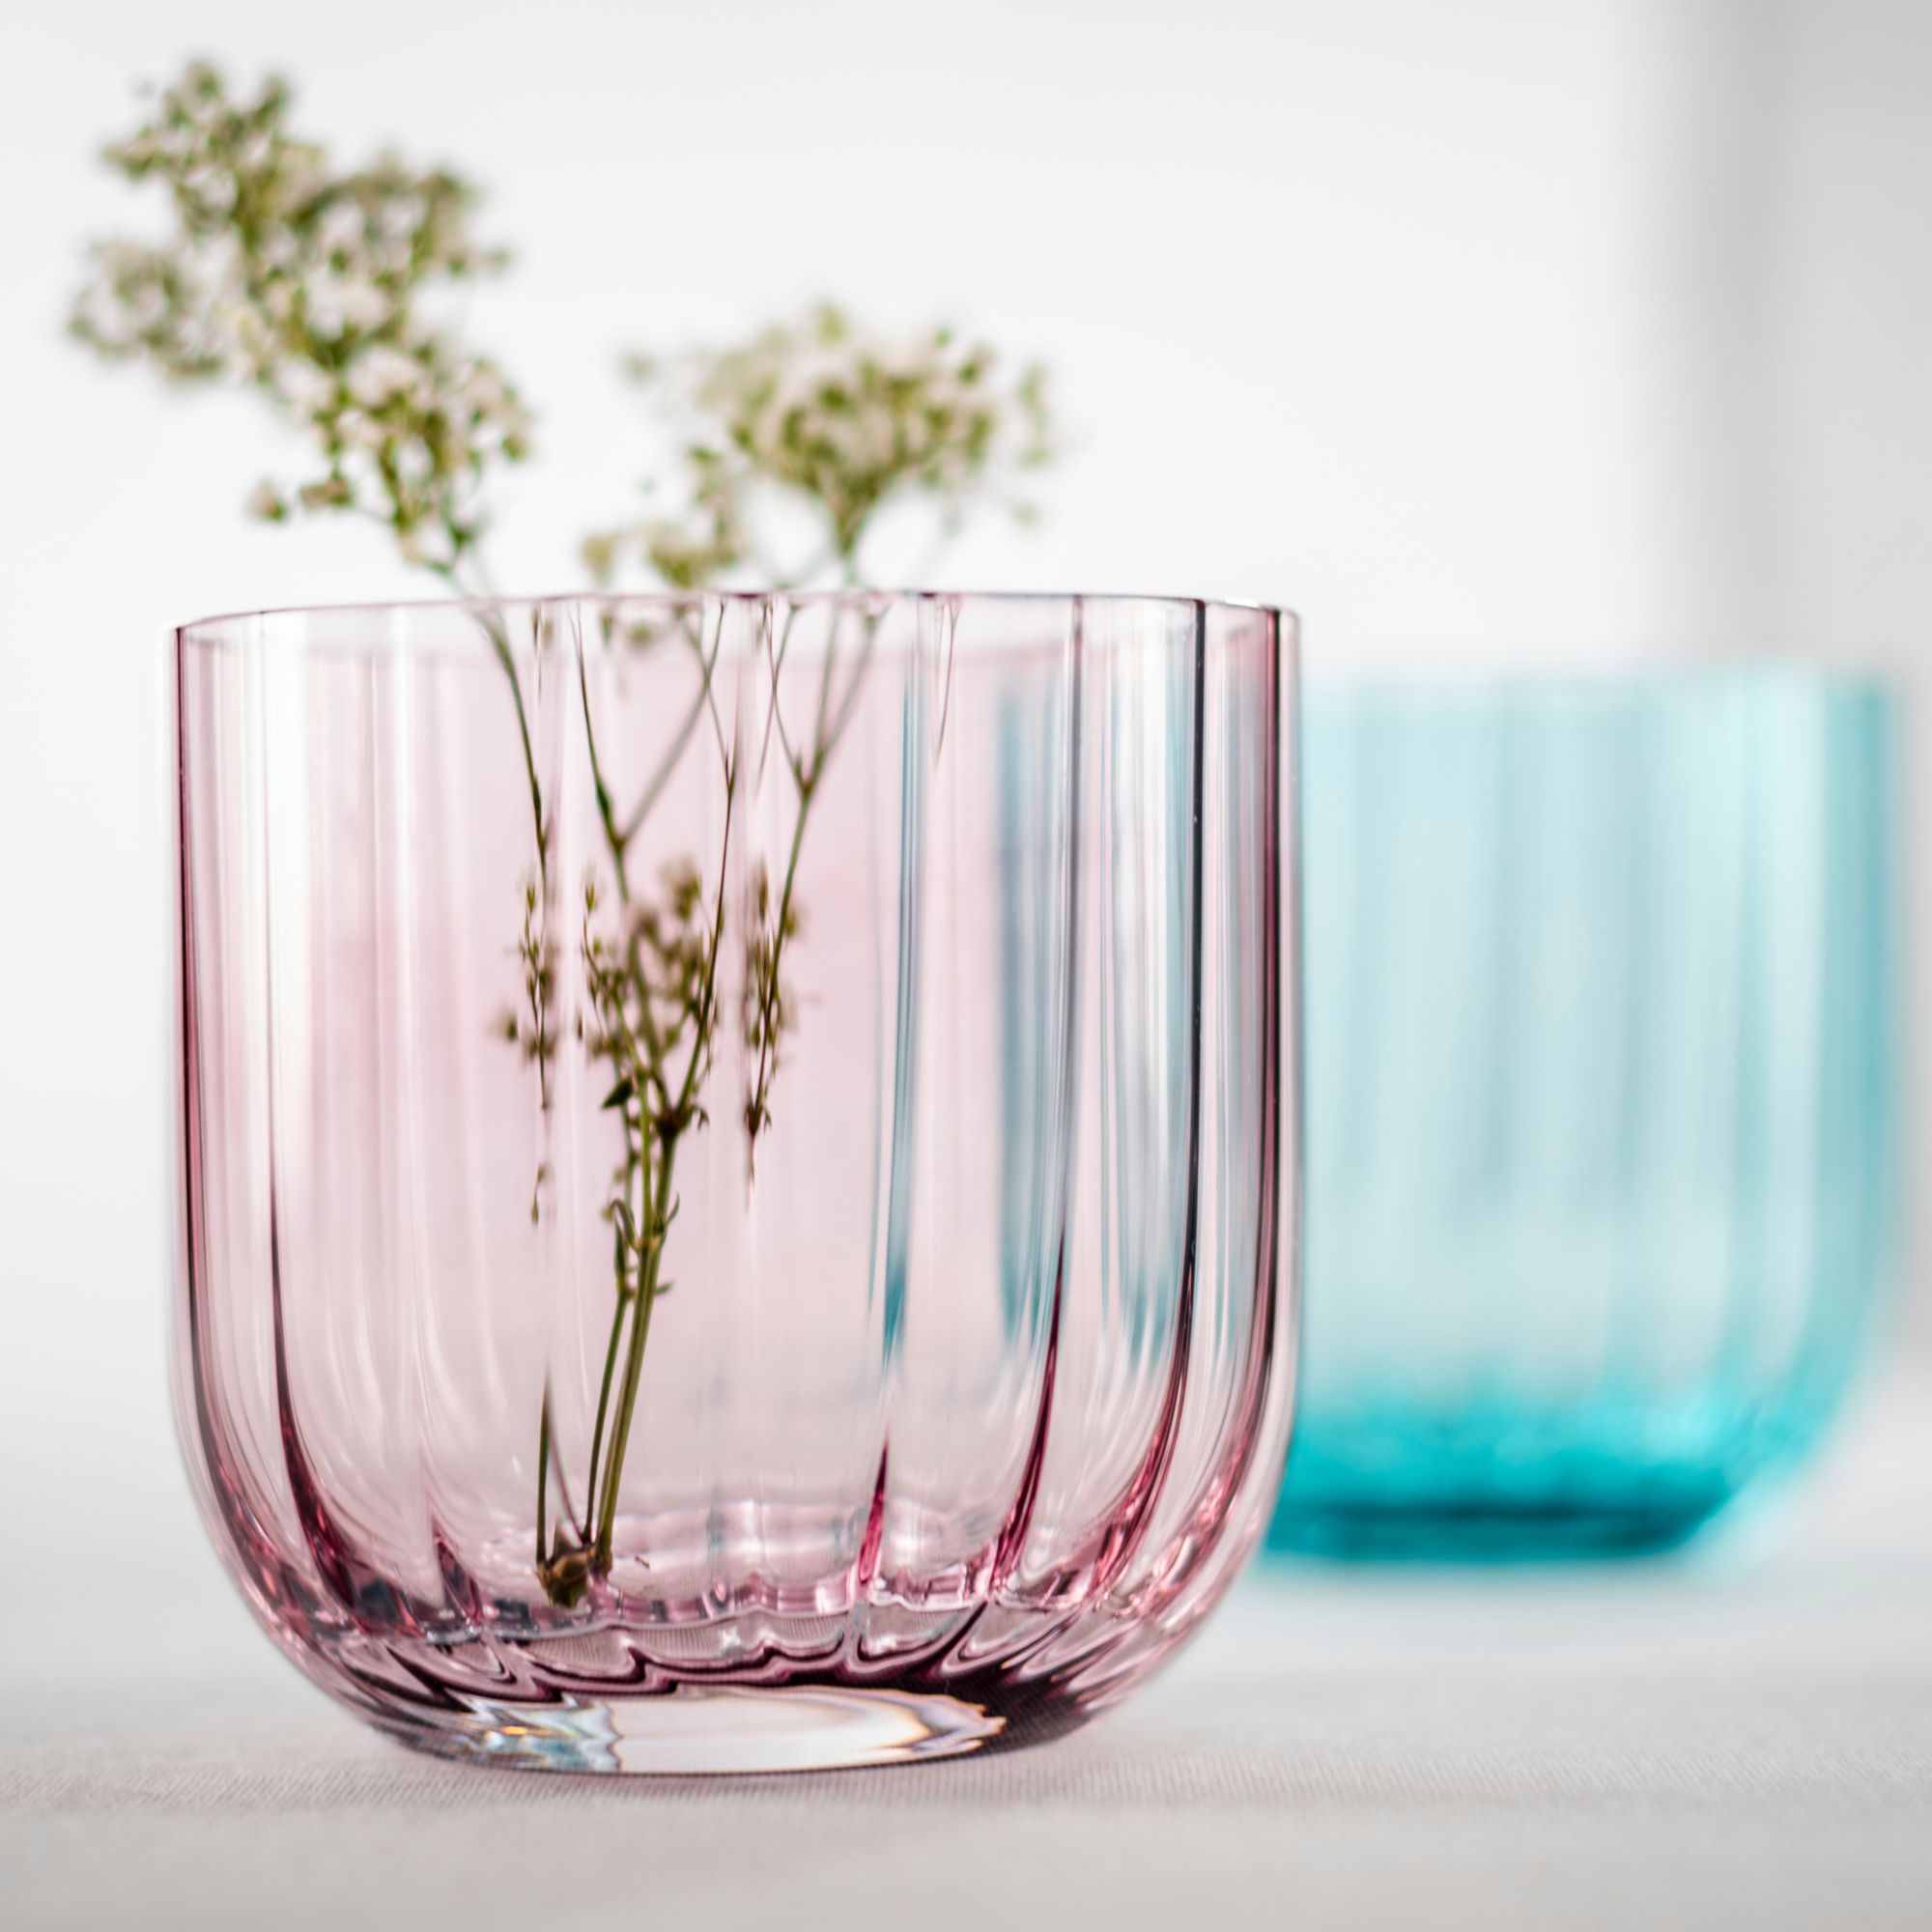 Zwiesel Glass - Vase Dialogue 124 lilac